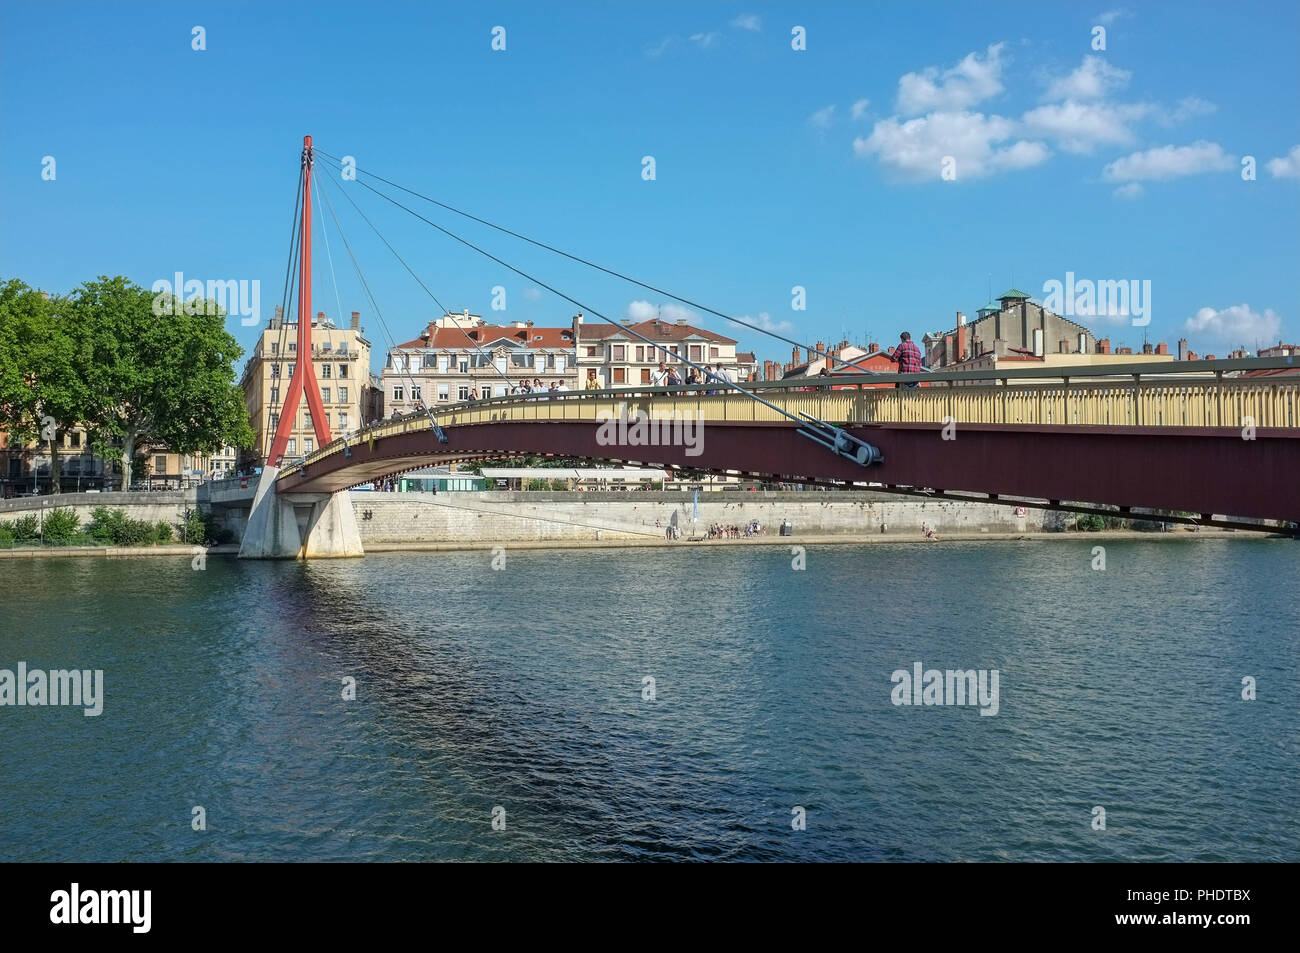 Passerelle du Palais de Justice, Gateway Courthouse, Over the Saone River in Lyon France Stock Photo